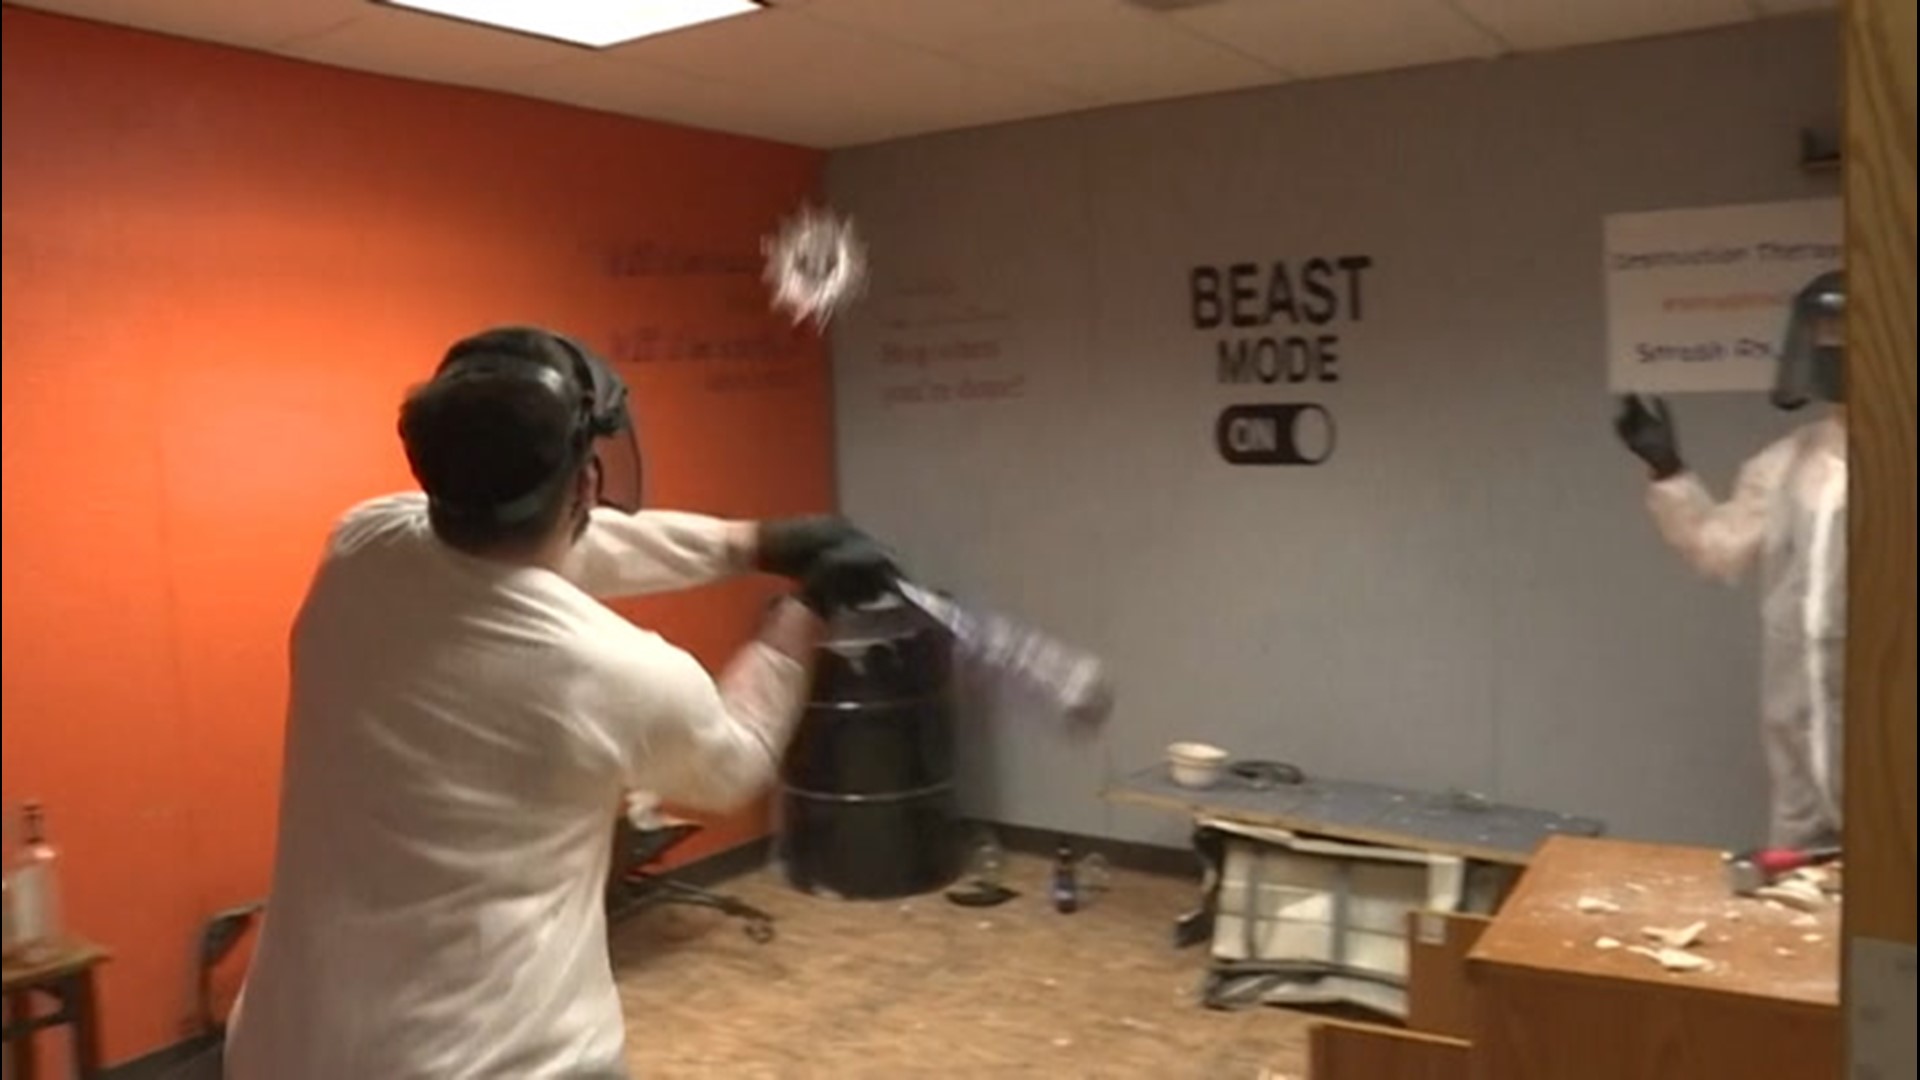 With the stress of the pandemic continuing to mount, 'rage rooms' are a unique way for people to blow off steam. Clients of the program get to destroy items for an allotted time.